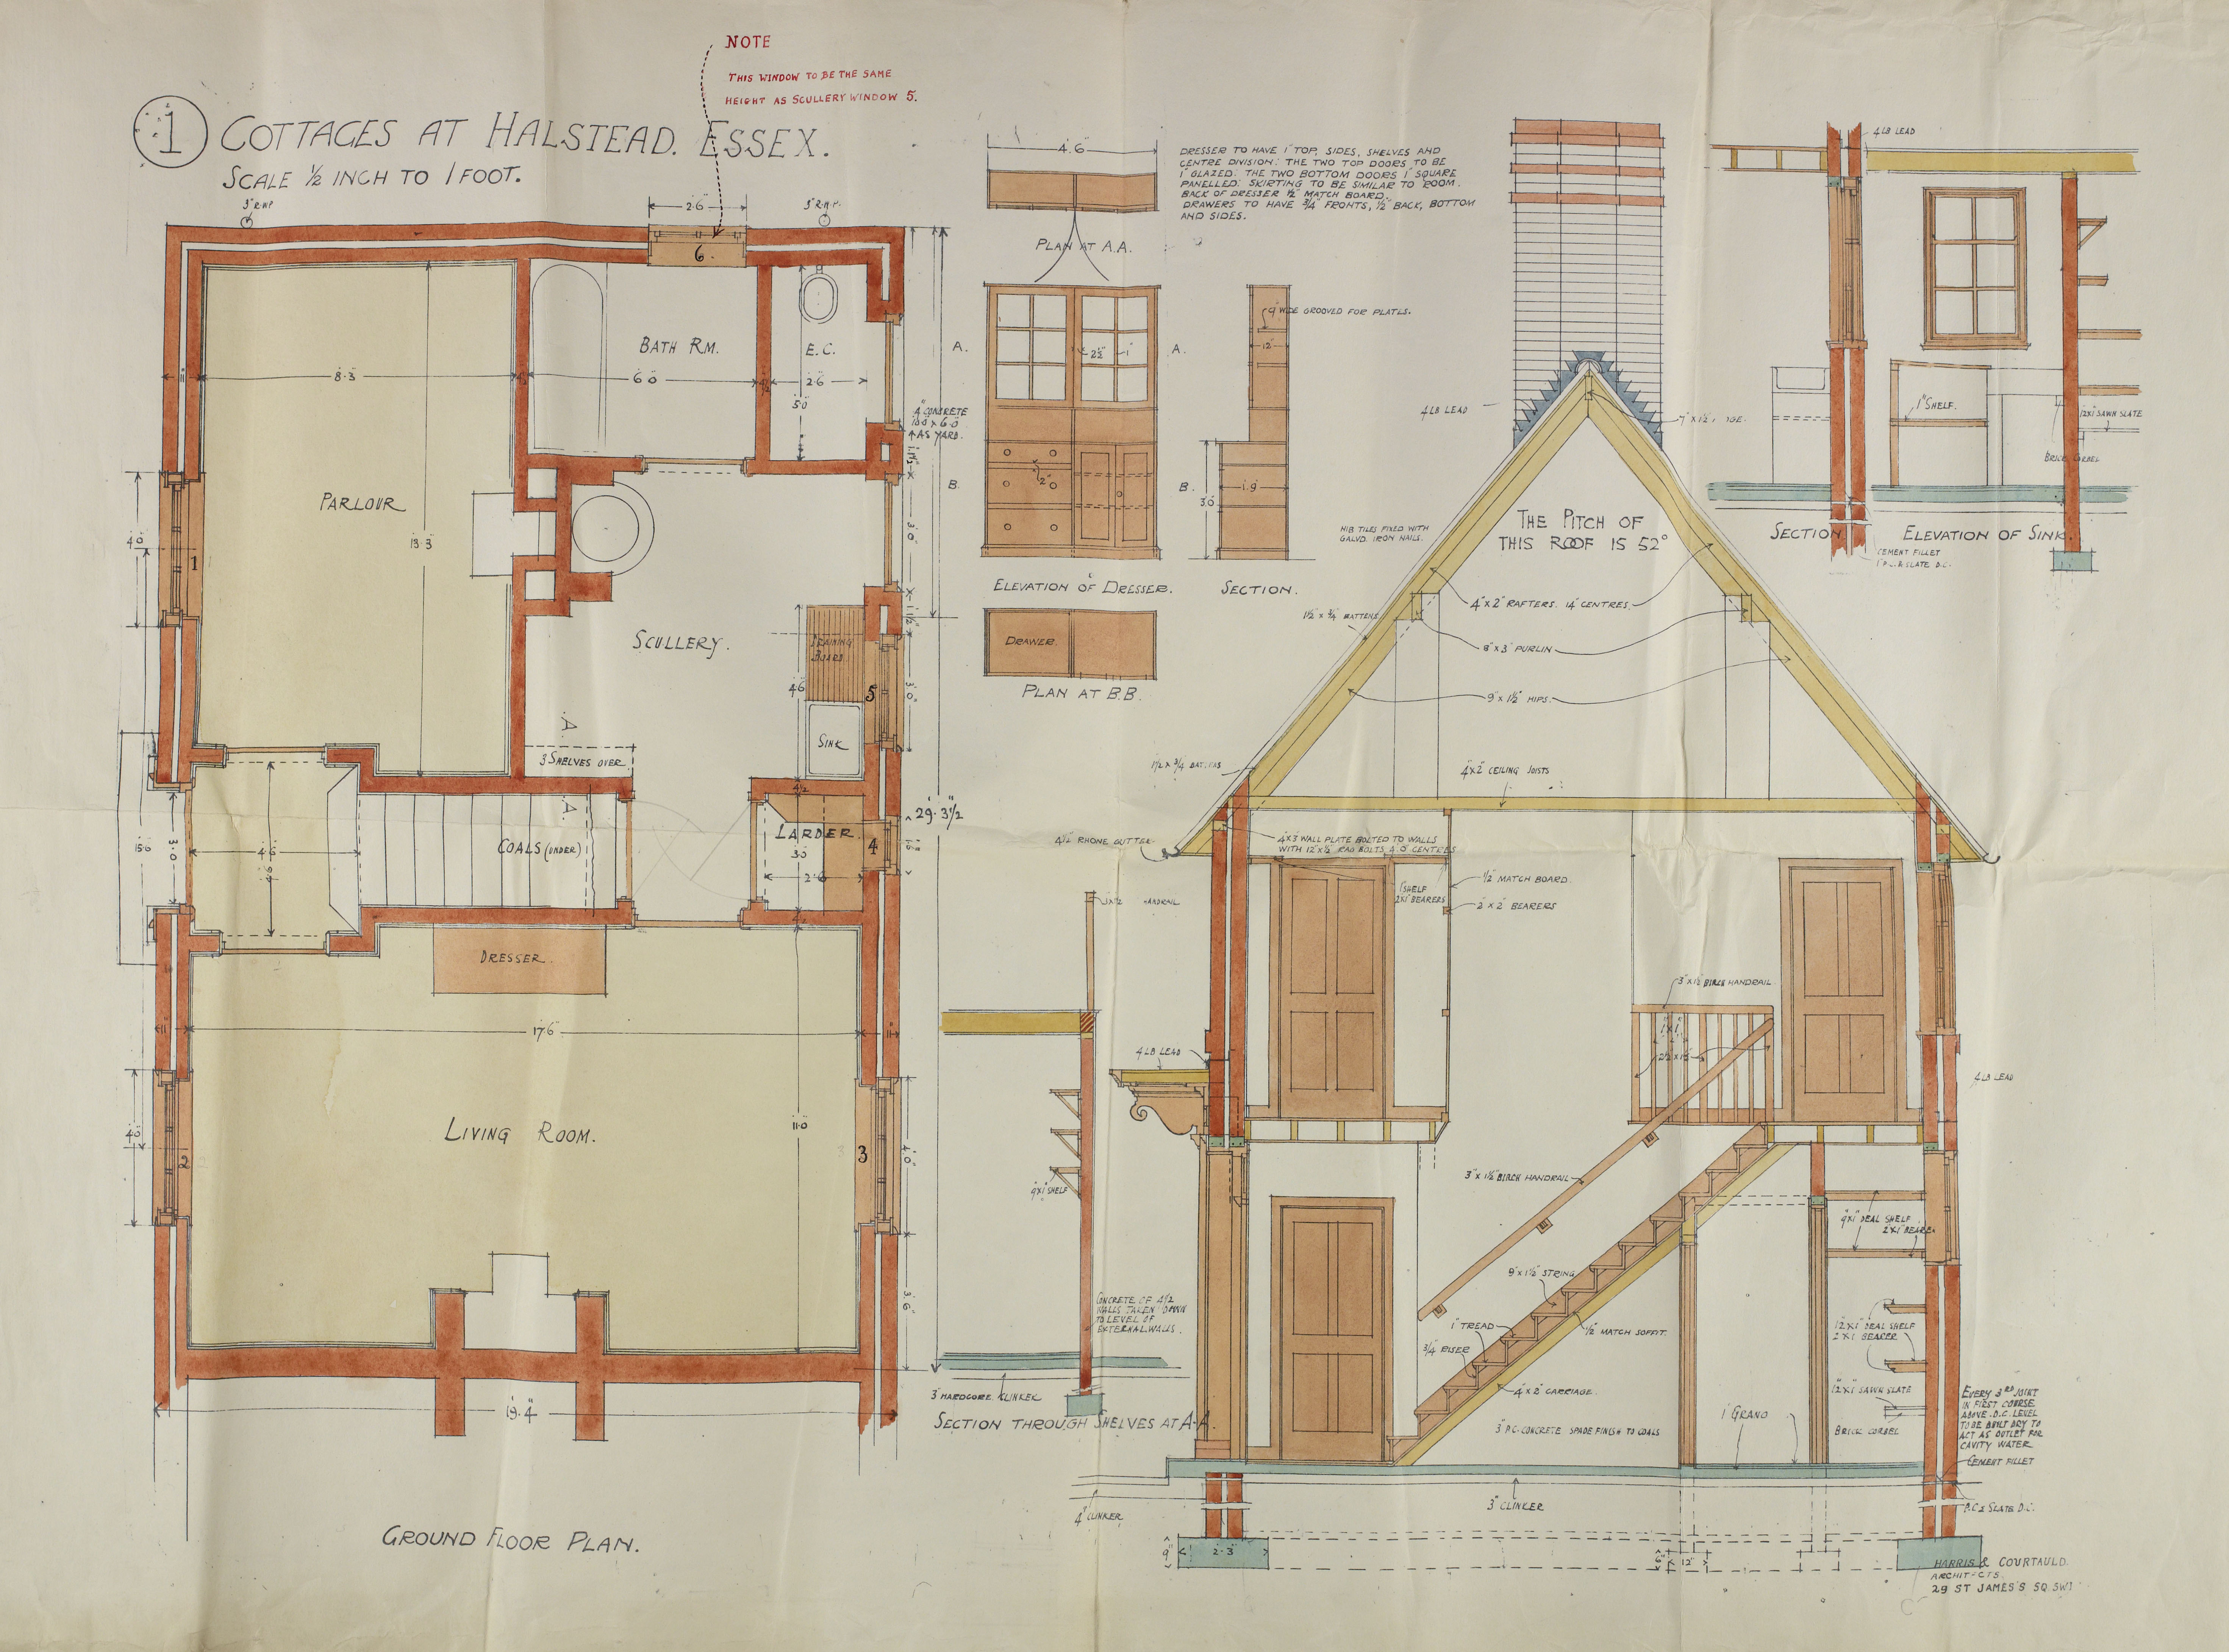 Plan of housing built for Courtauld's workers (D-RH Pb1-16)